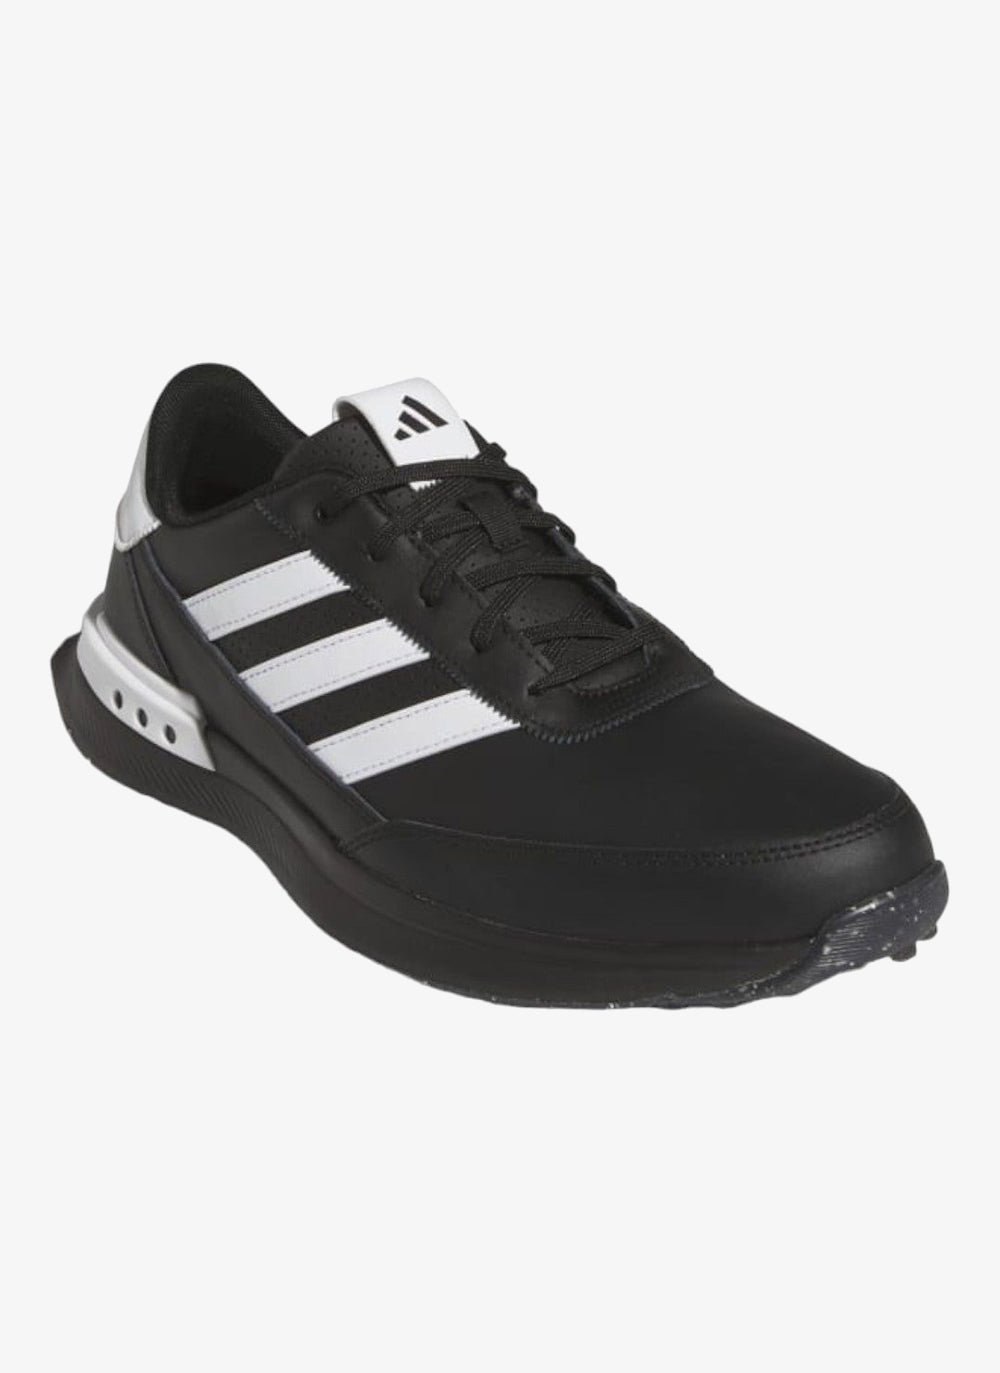 adidas S2G SL Leather Golf Shoes IG8192